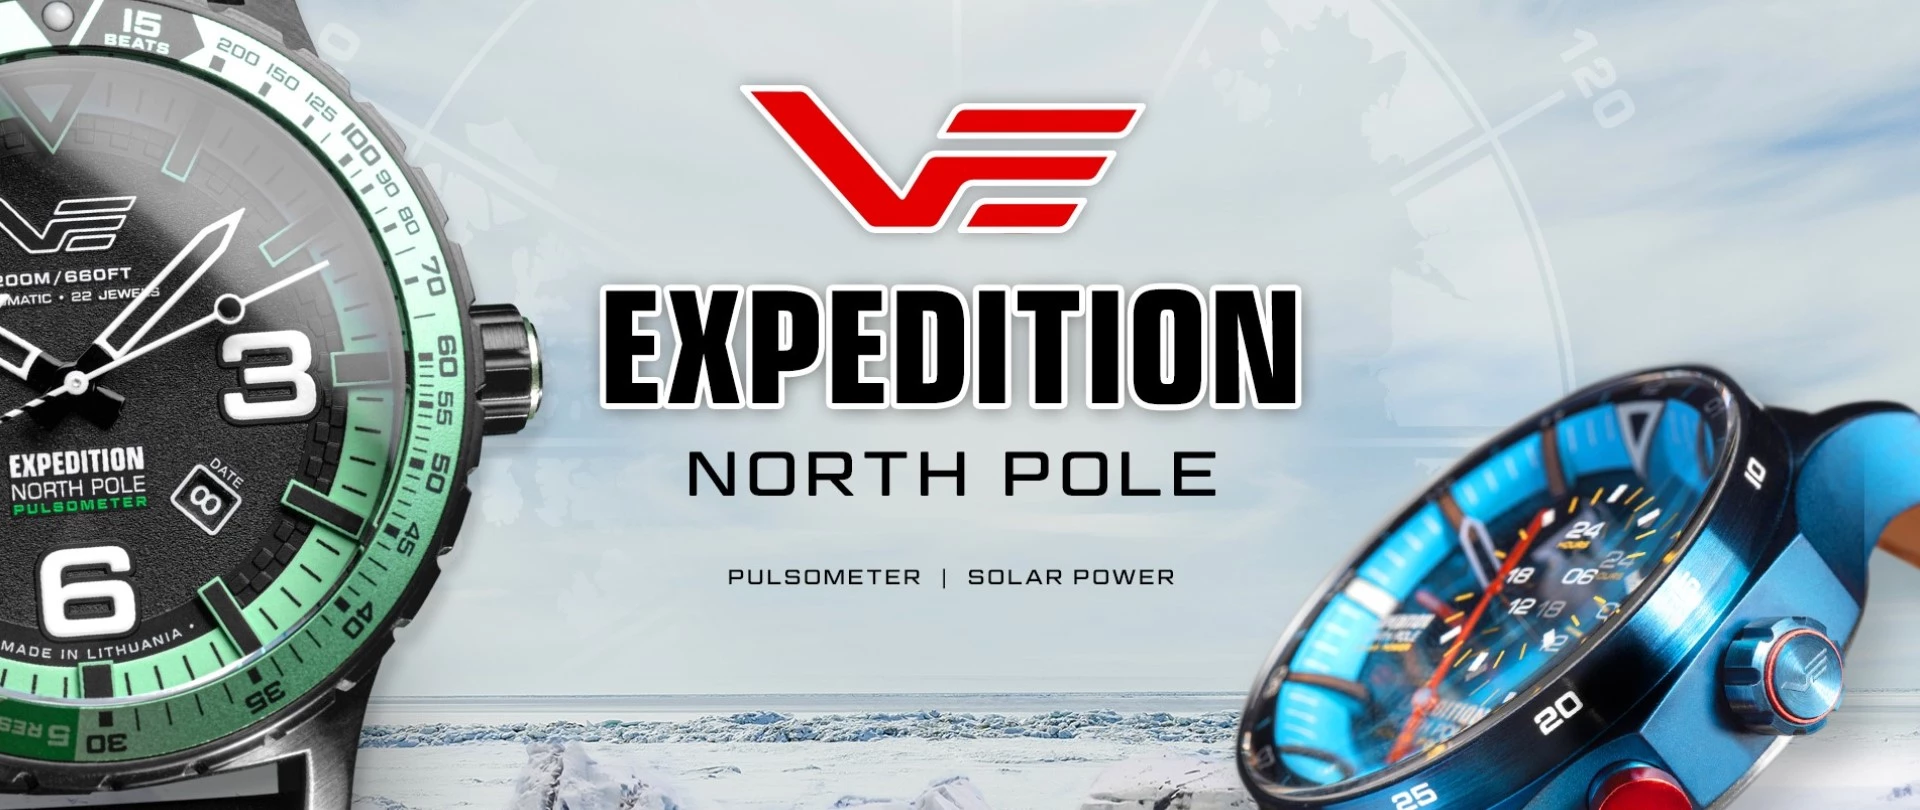 NEW EXPEDITION NORTH POLE